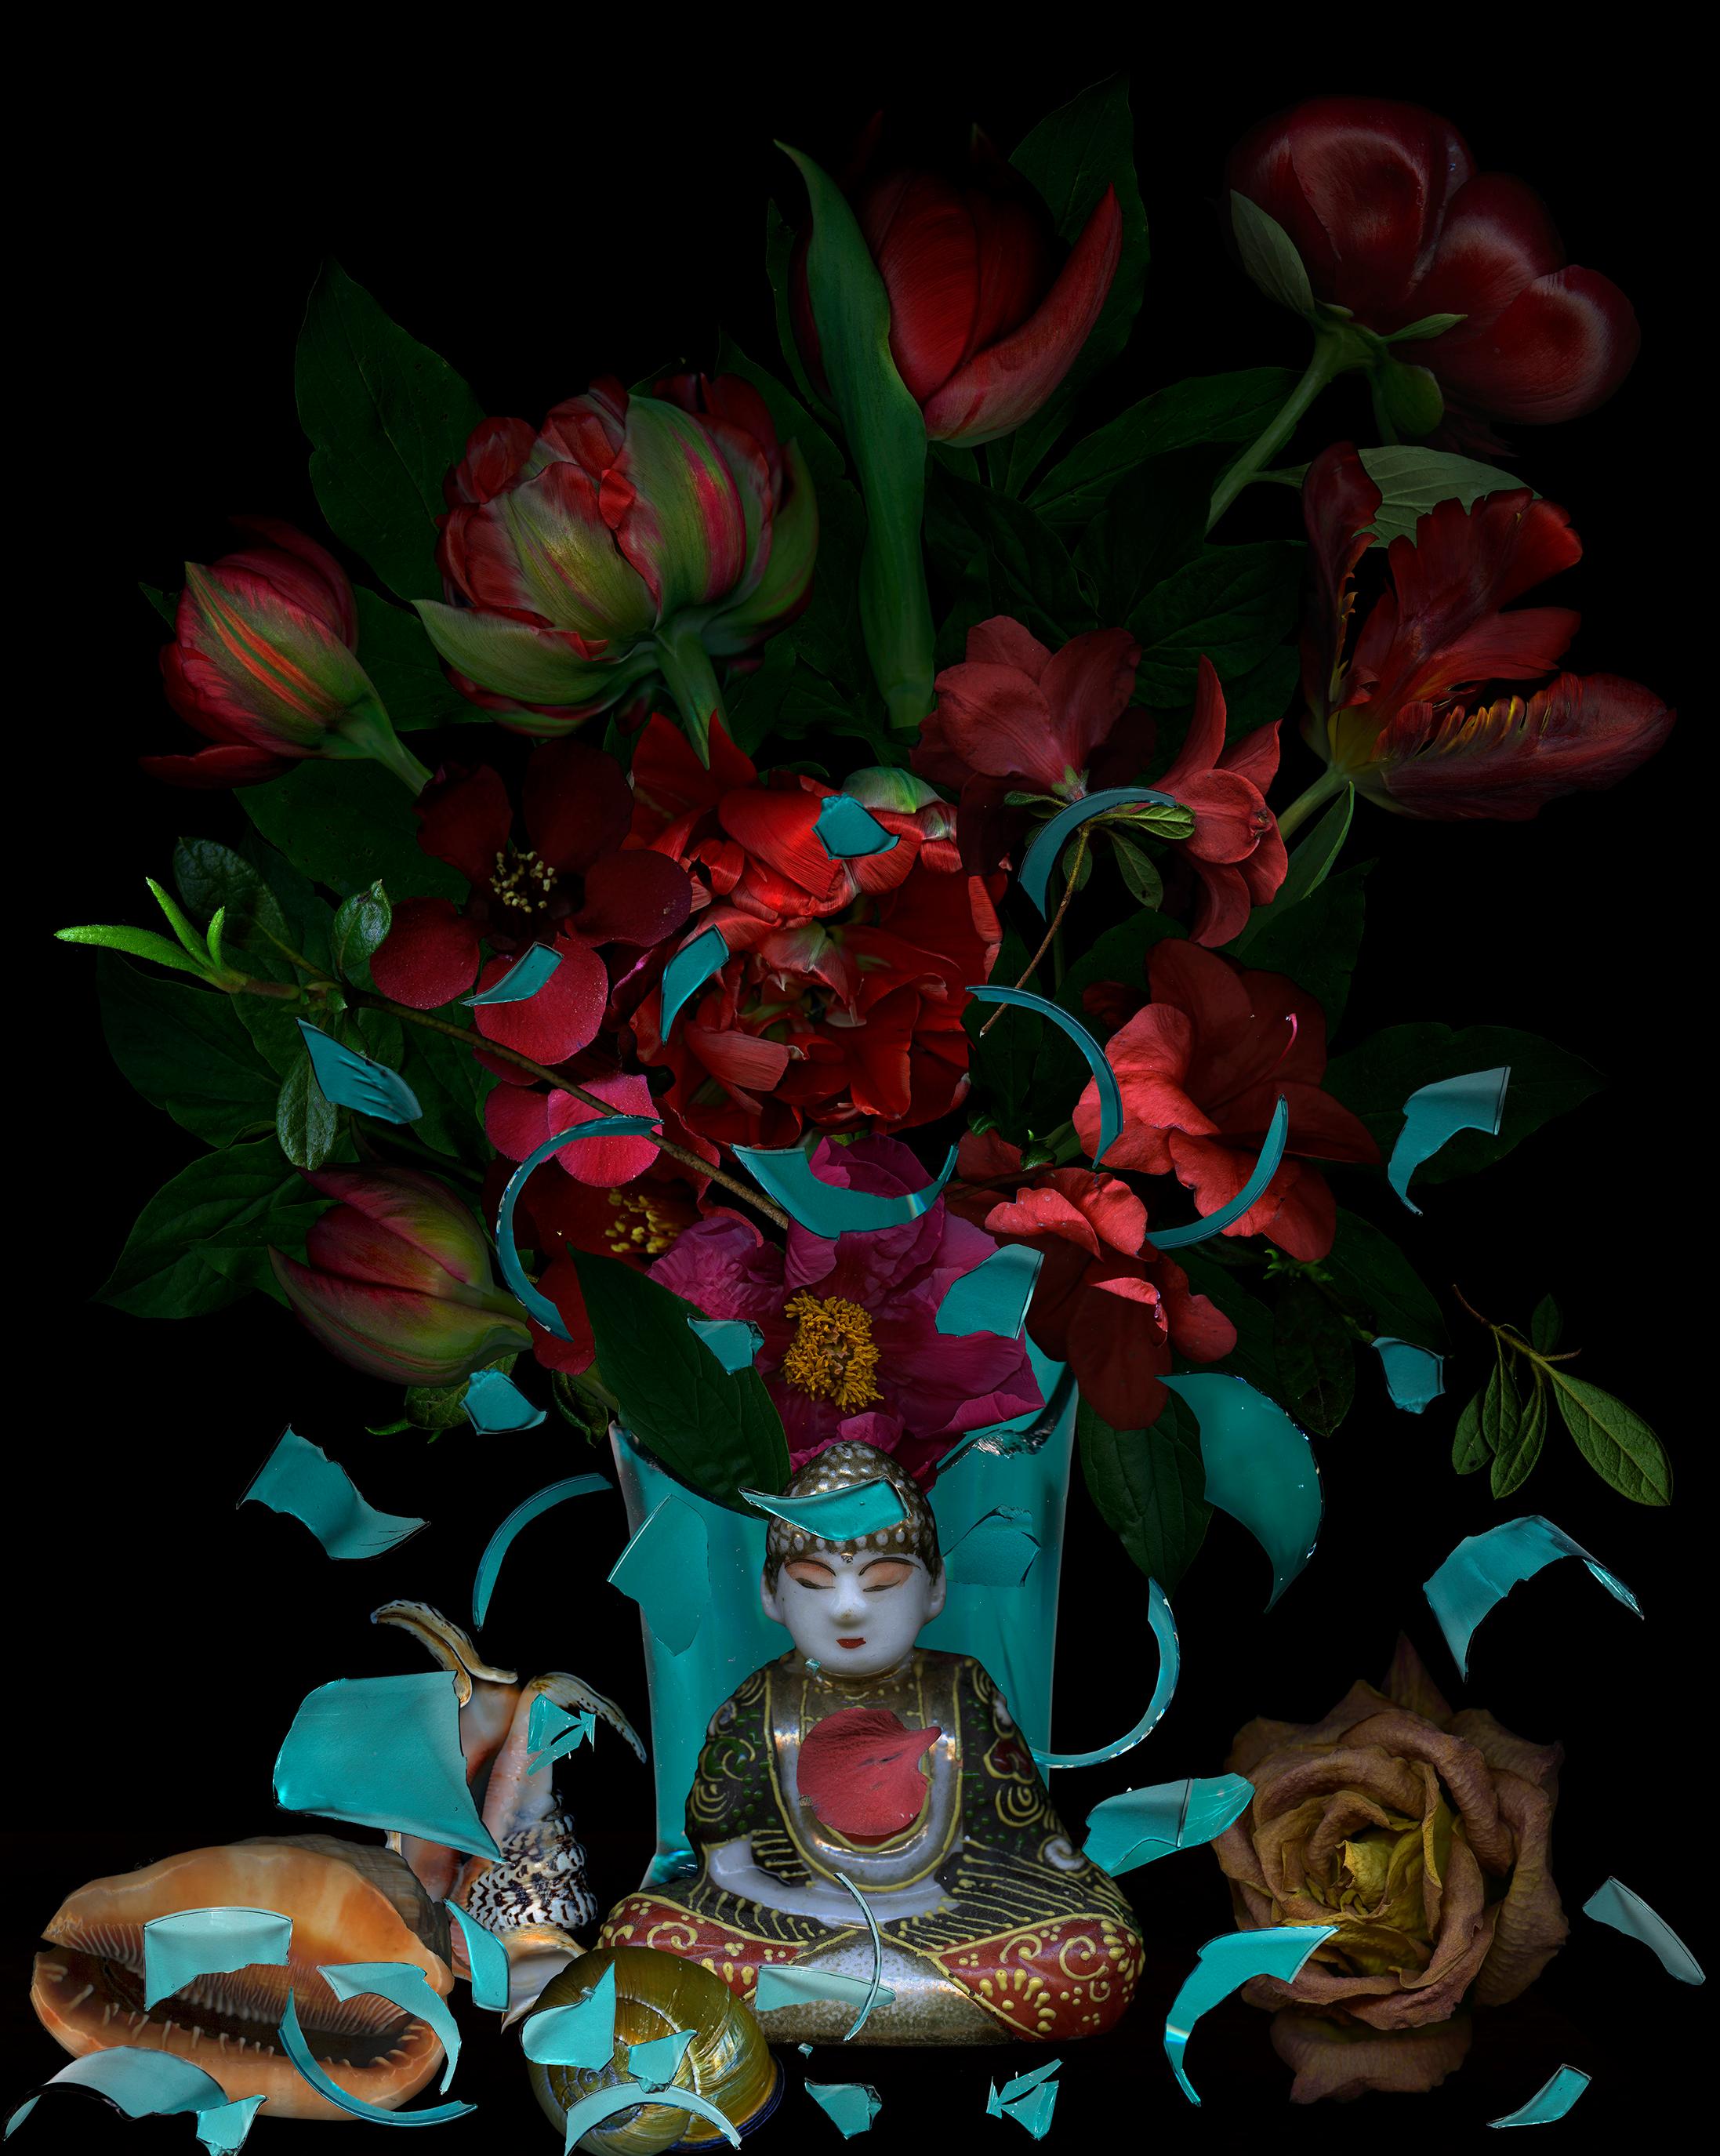 Red Flowers and Buddha, 2017 by Zoltan Gerliczki
From the series "Still Life"
Archival Pigment Print 
Image size: 31.5 in H x 25.5 in W.
Edition of 6 + 2AP
Unframed

As an artist, He is fascinated by the opulence and richness of still life of the